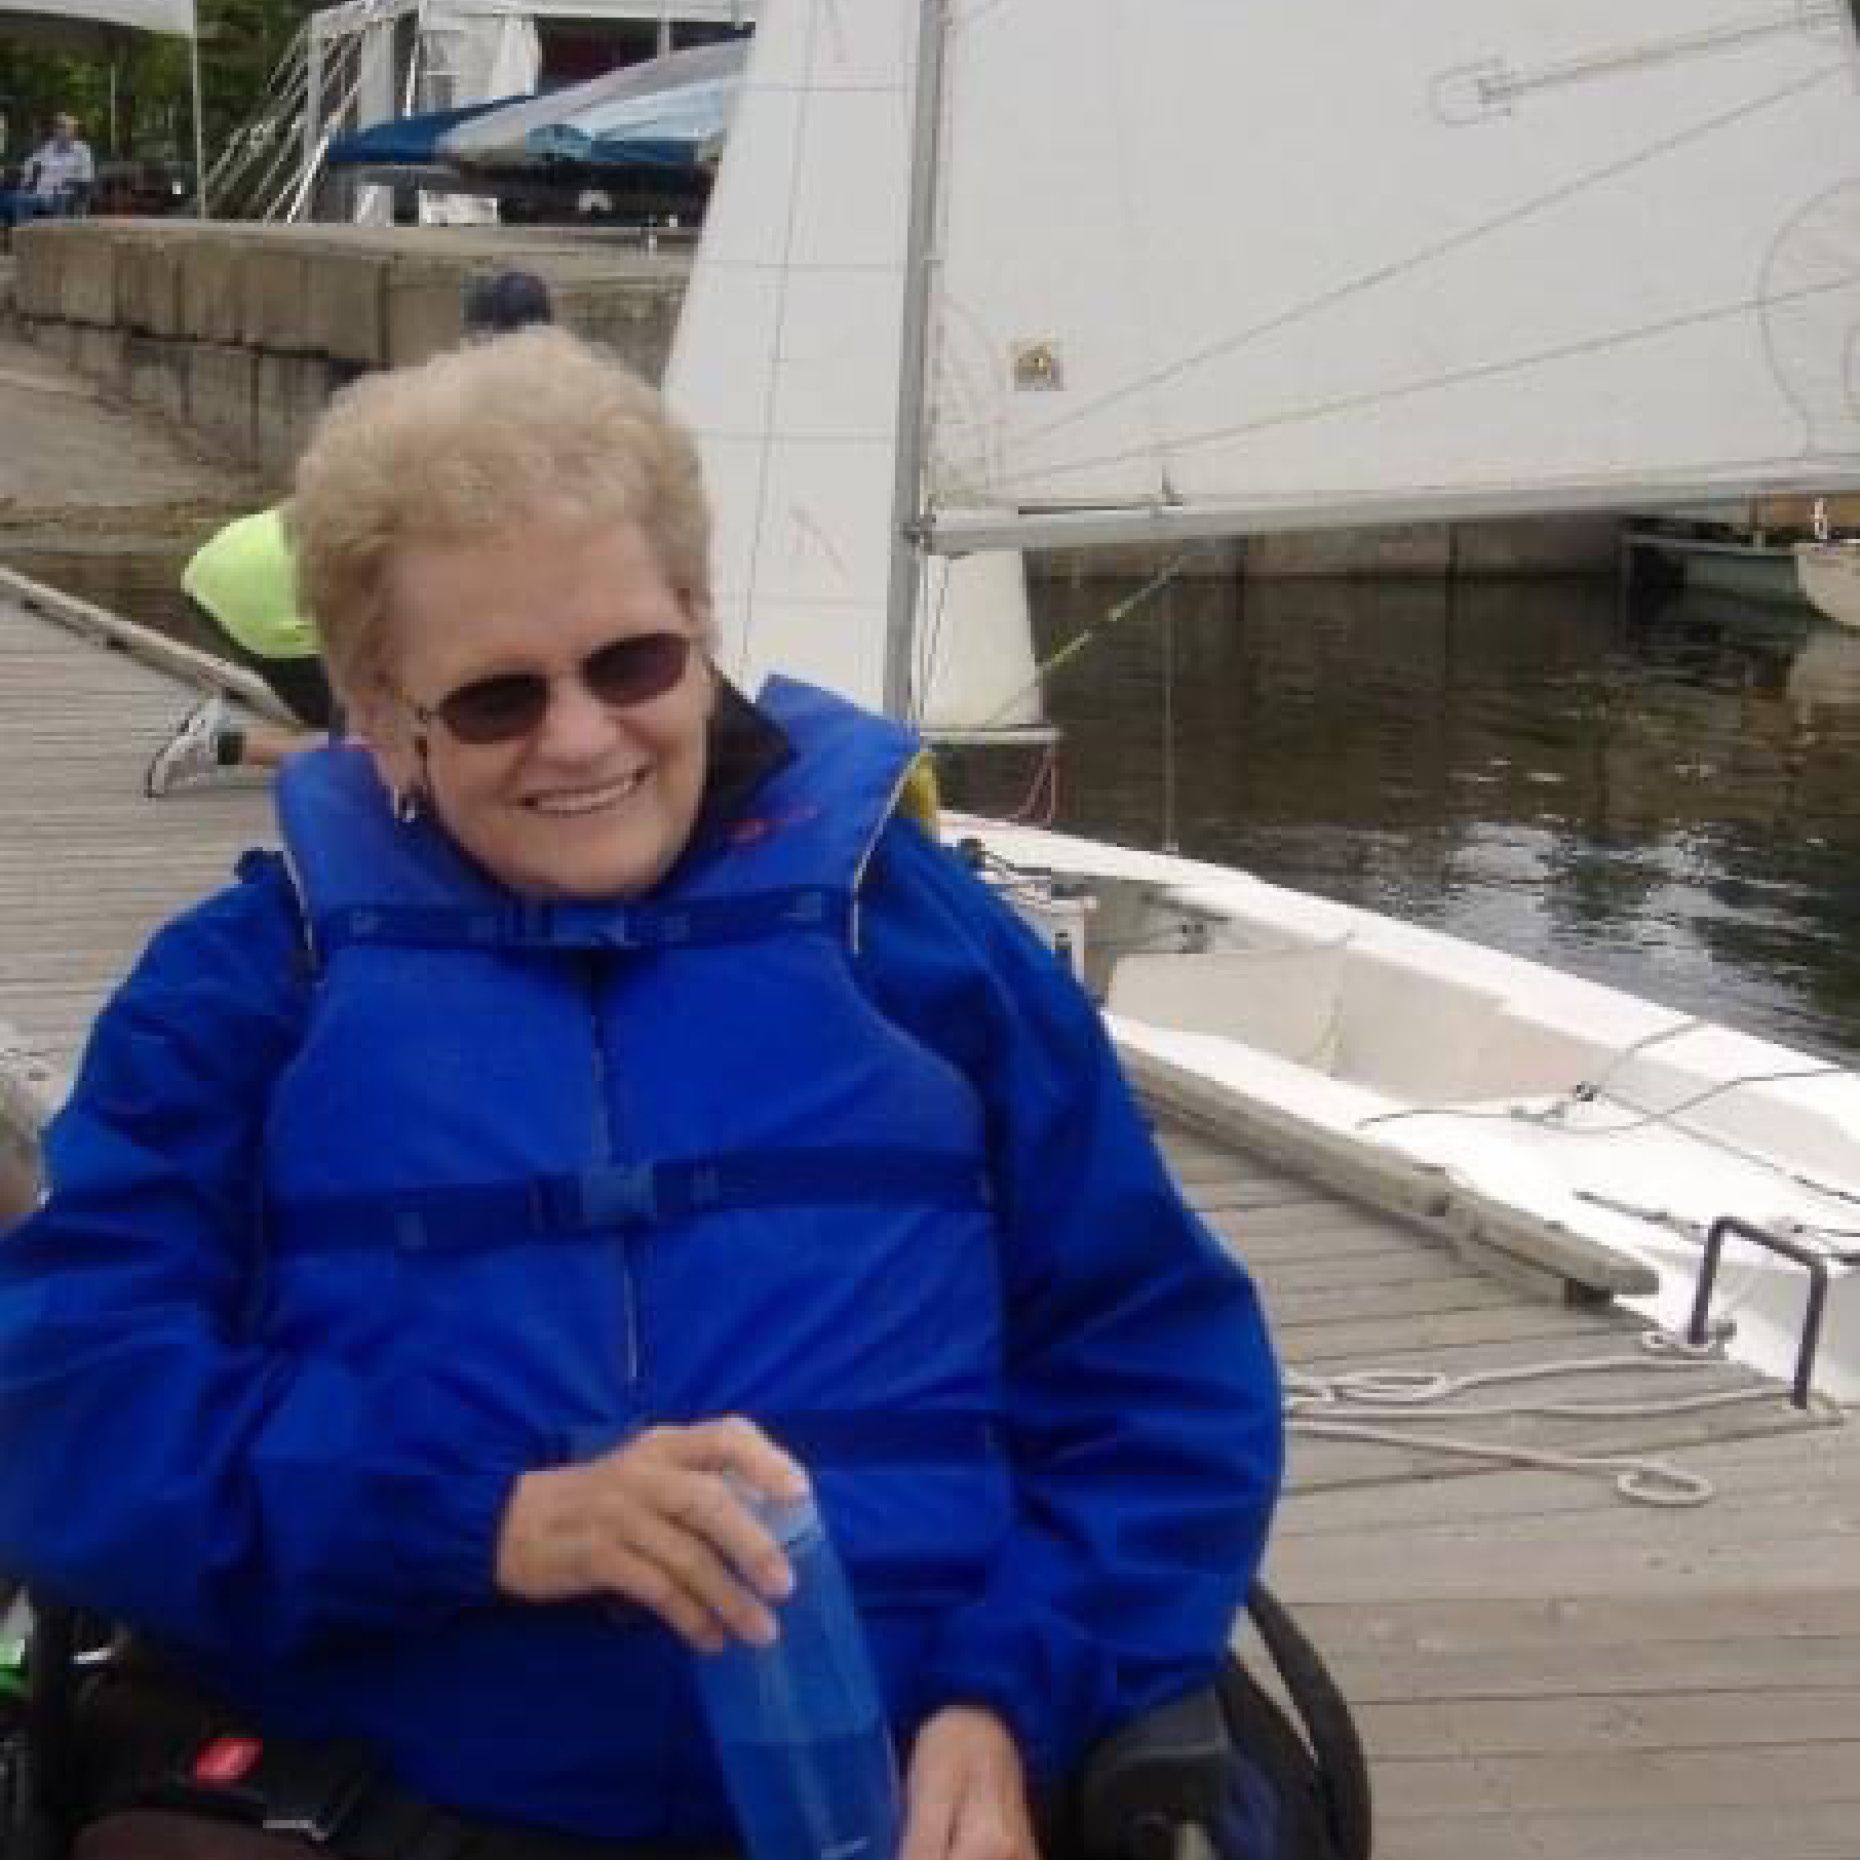 Judy Winship in her wheelchair on a dock with sailboat in background